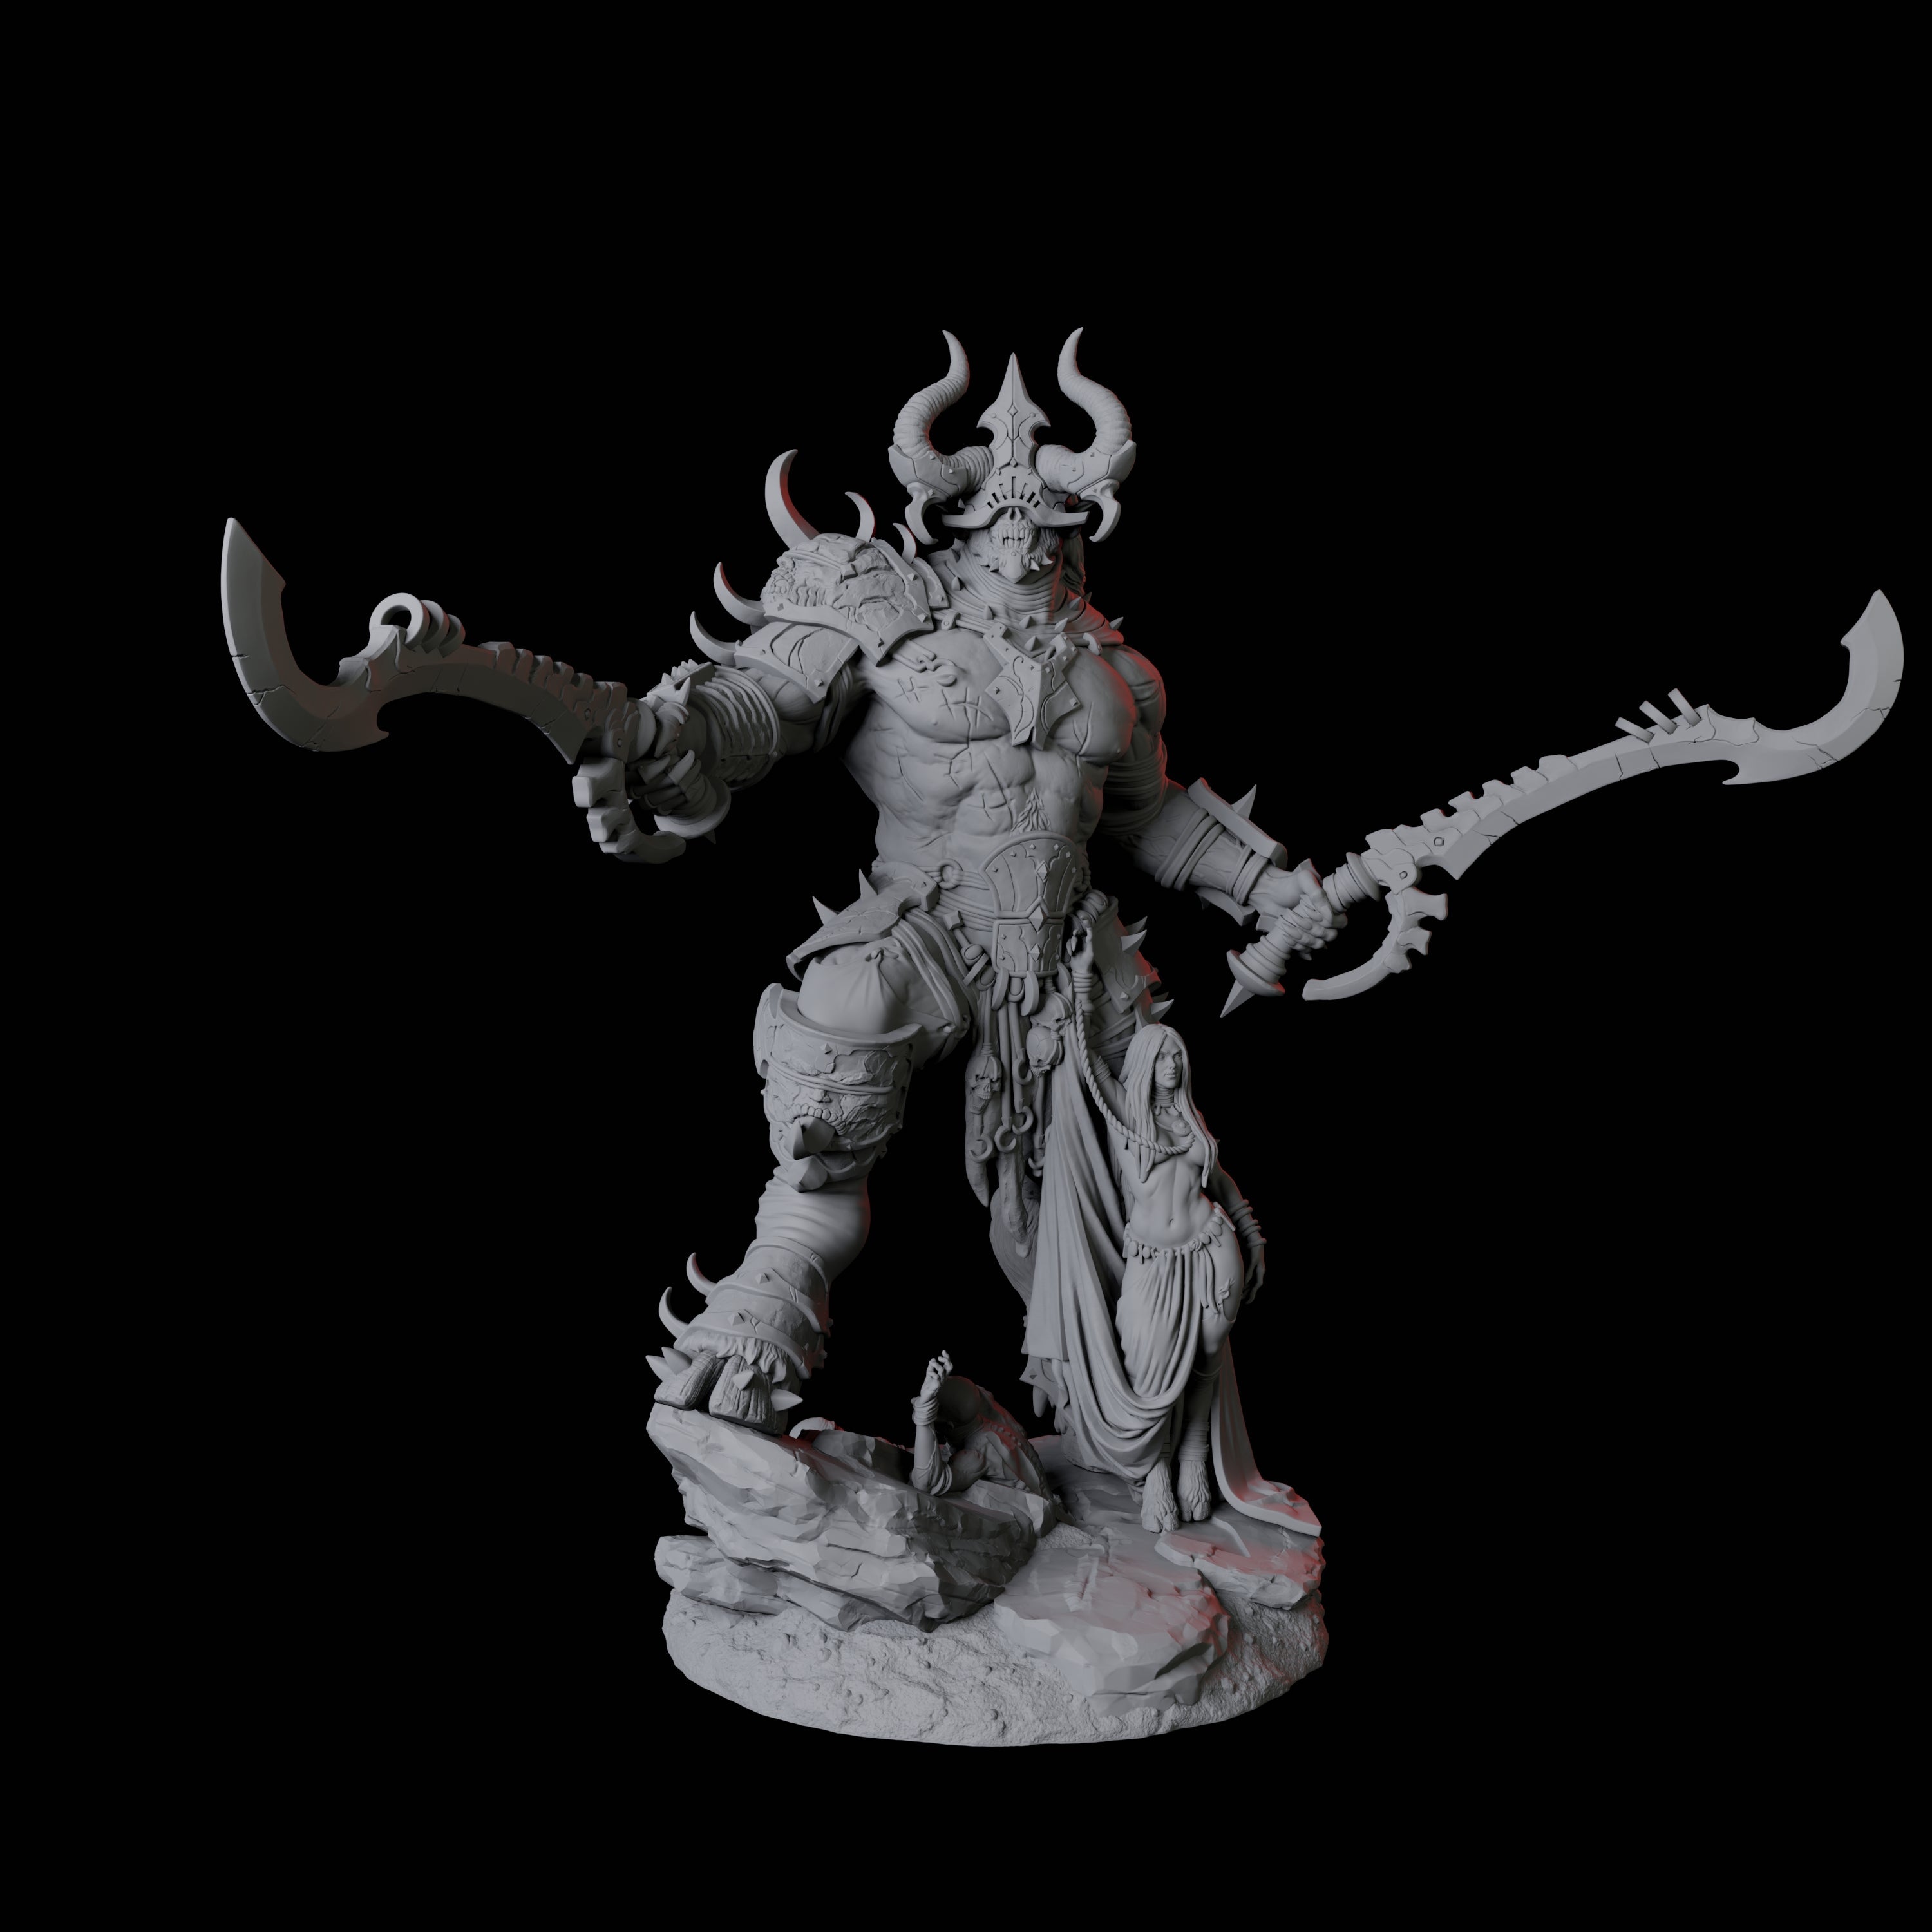 Seduced Bearded Devil Champion D Miniature for Dungeons and Dragons, Pathfinder or other TTRPGs